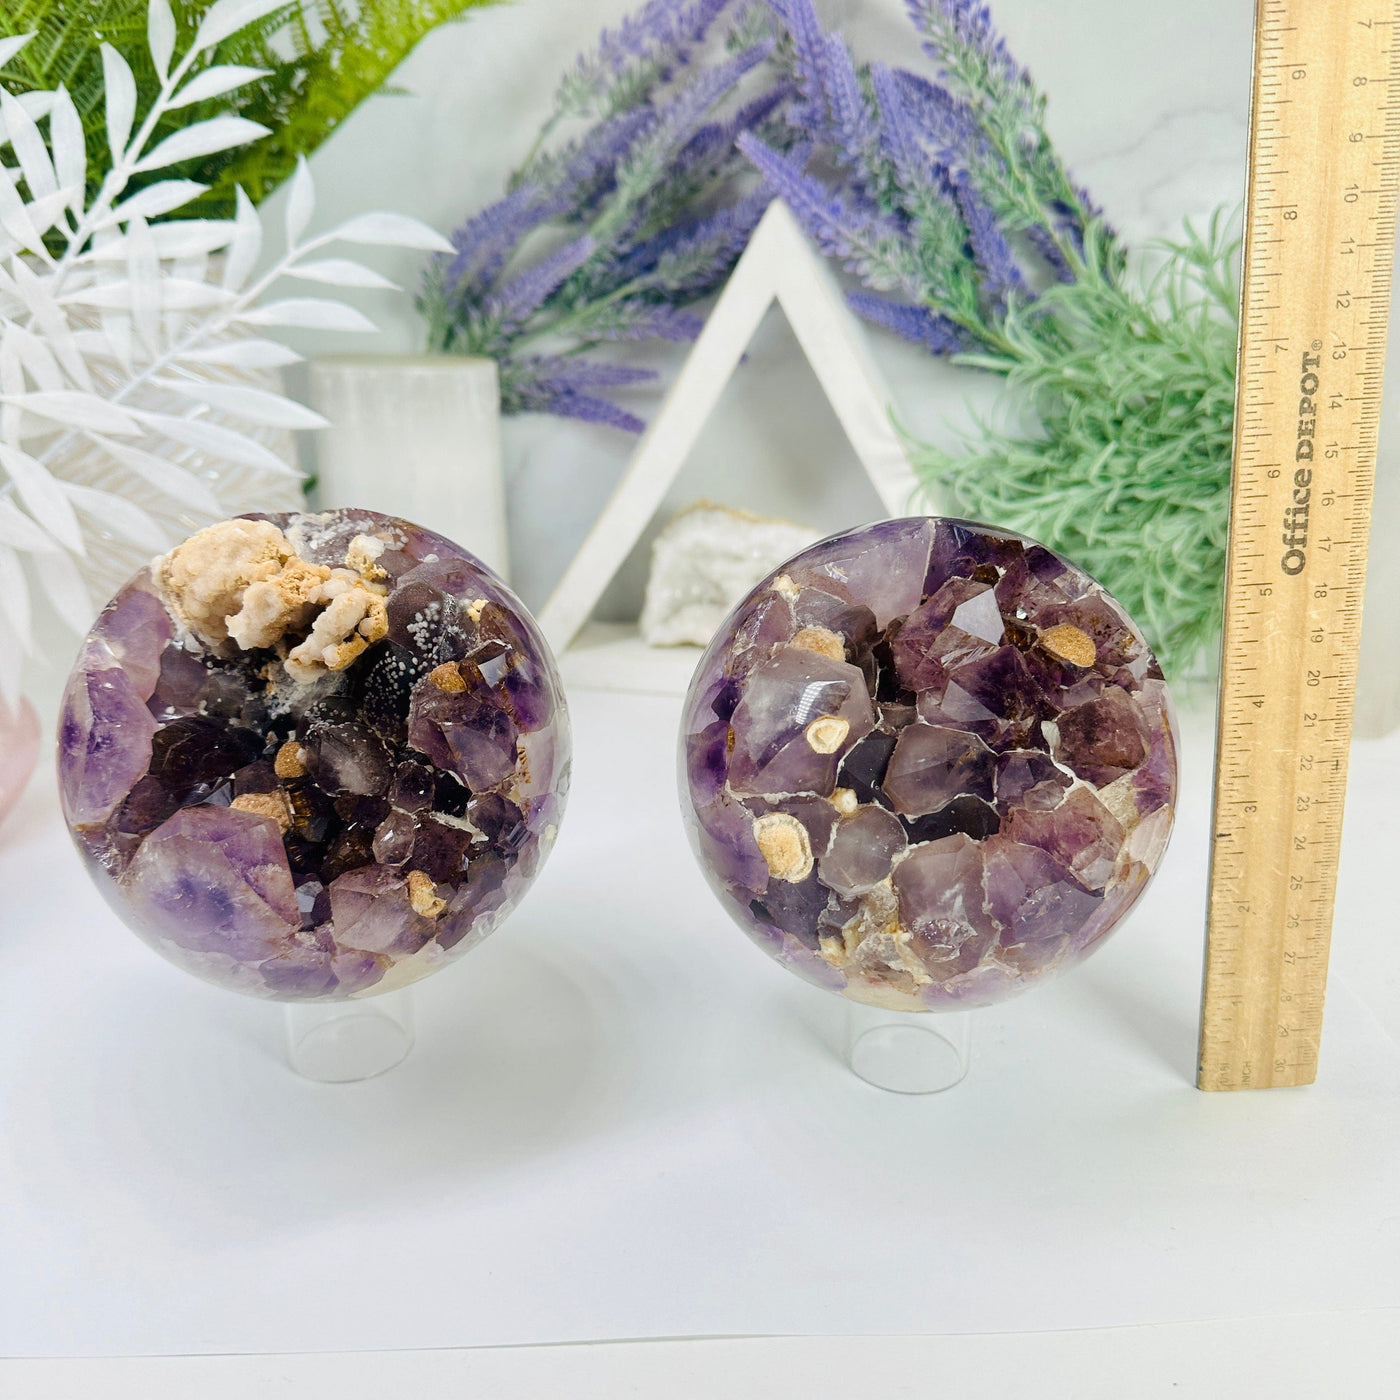 Amethyst Agate Crystal Sphere with Calcite - You Choose variants C D with ruler for size reference